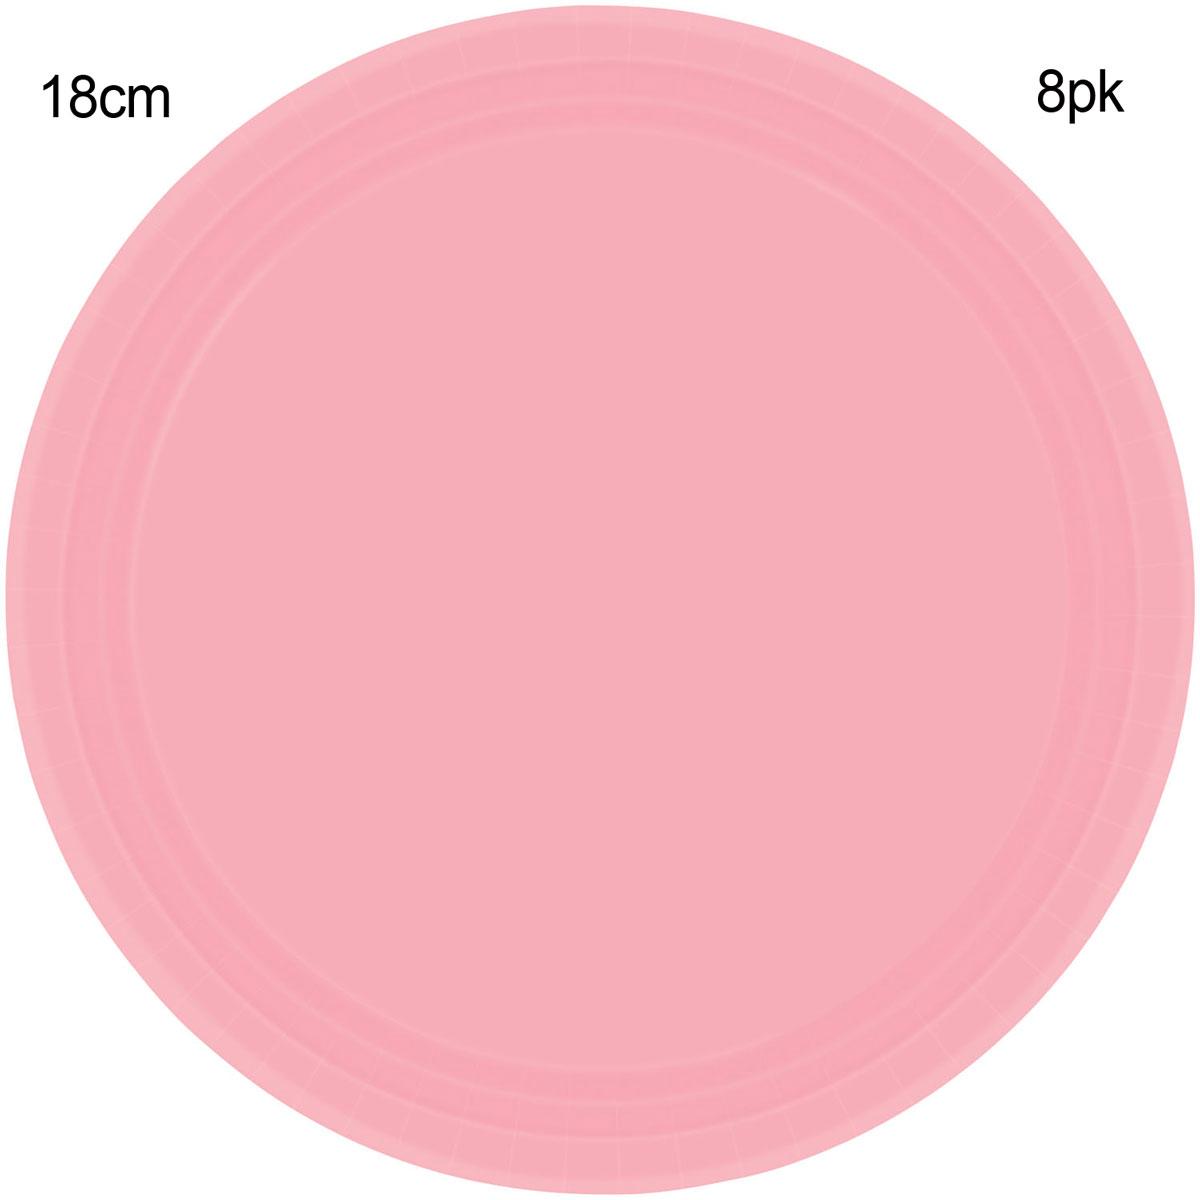 Pack 8 Baby Pink Paper Dessert Plates 17.8cm by Amscan 54015-109 available here at Karnival Costumes online party shop